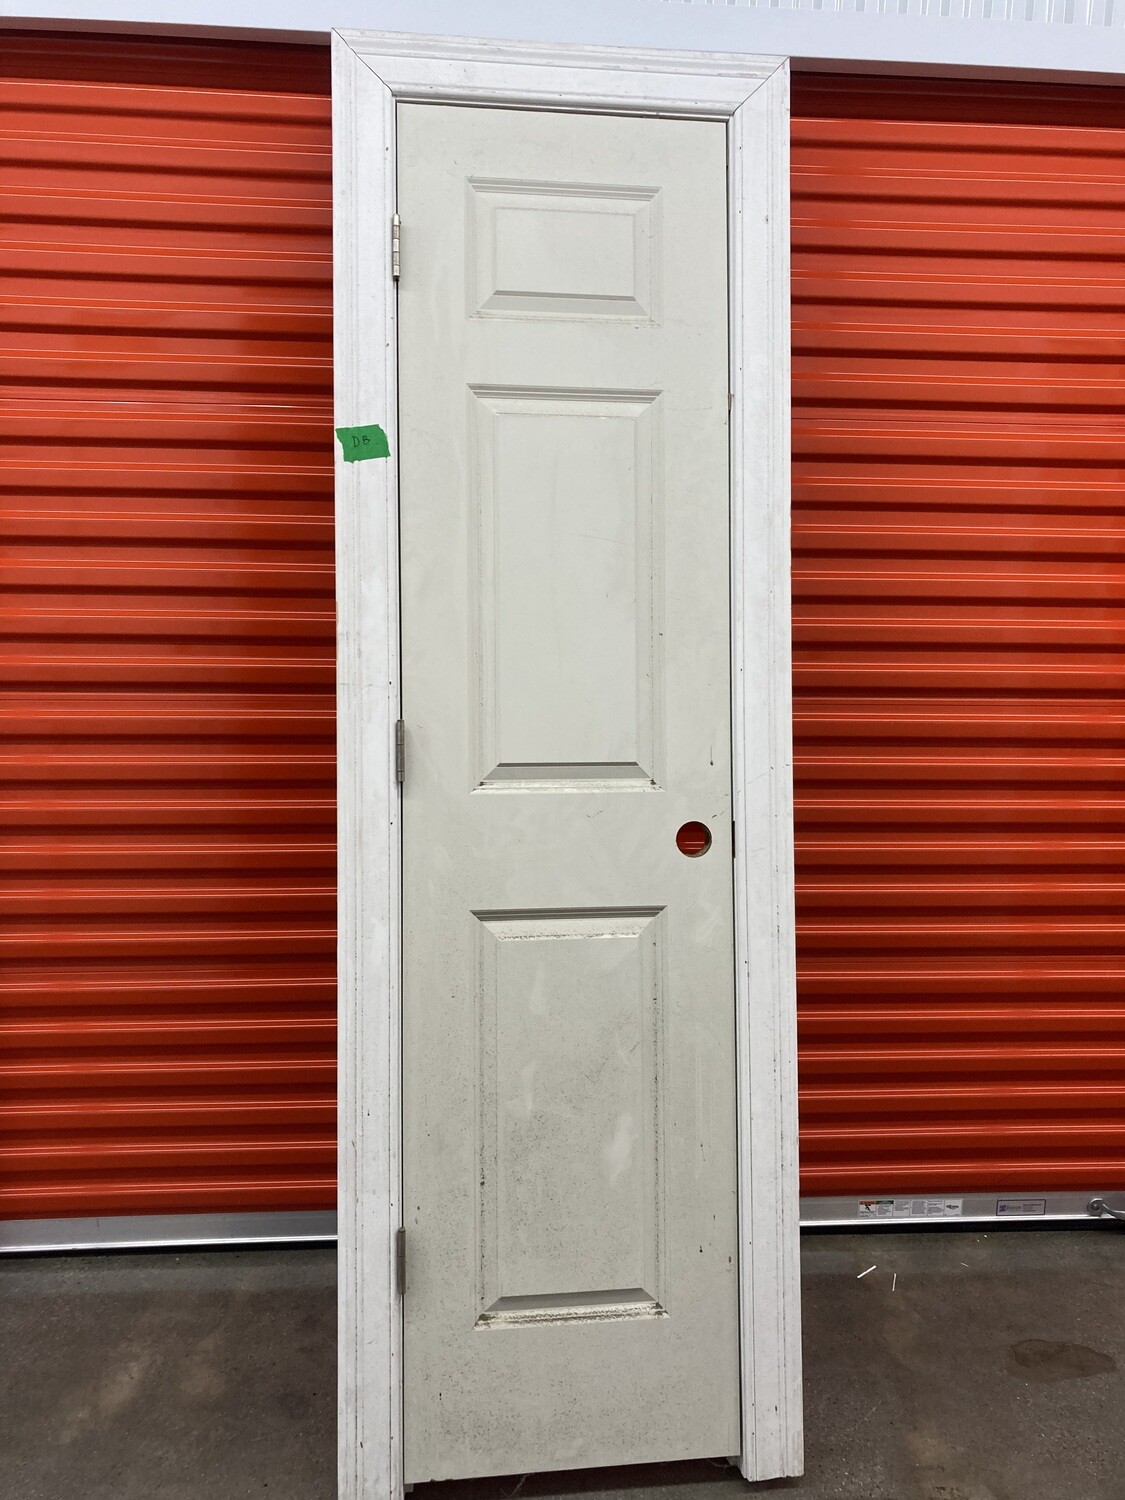 New Interior Prehung RH Door, 3-panel w/trim 20x80 (D8) #1148 ** 10 mos. to sell, clearance